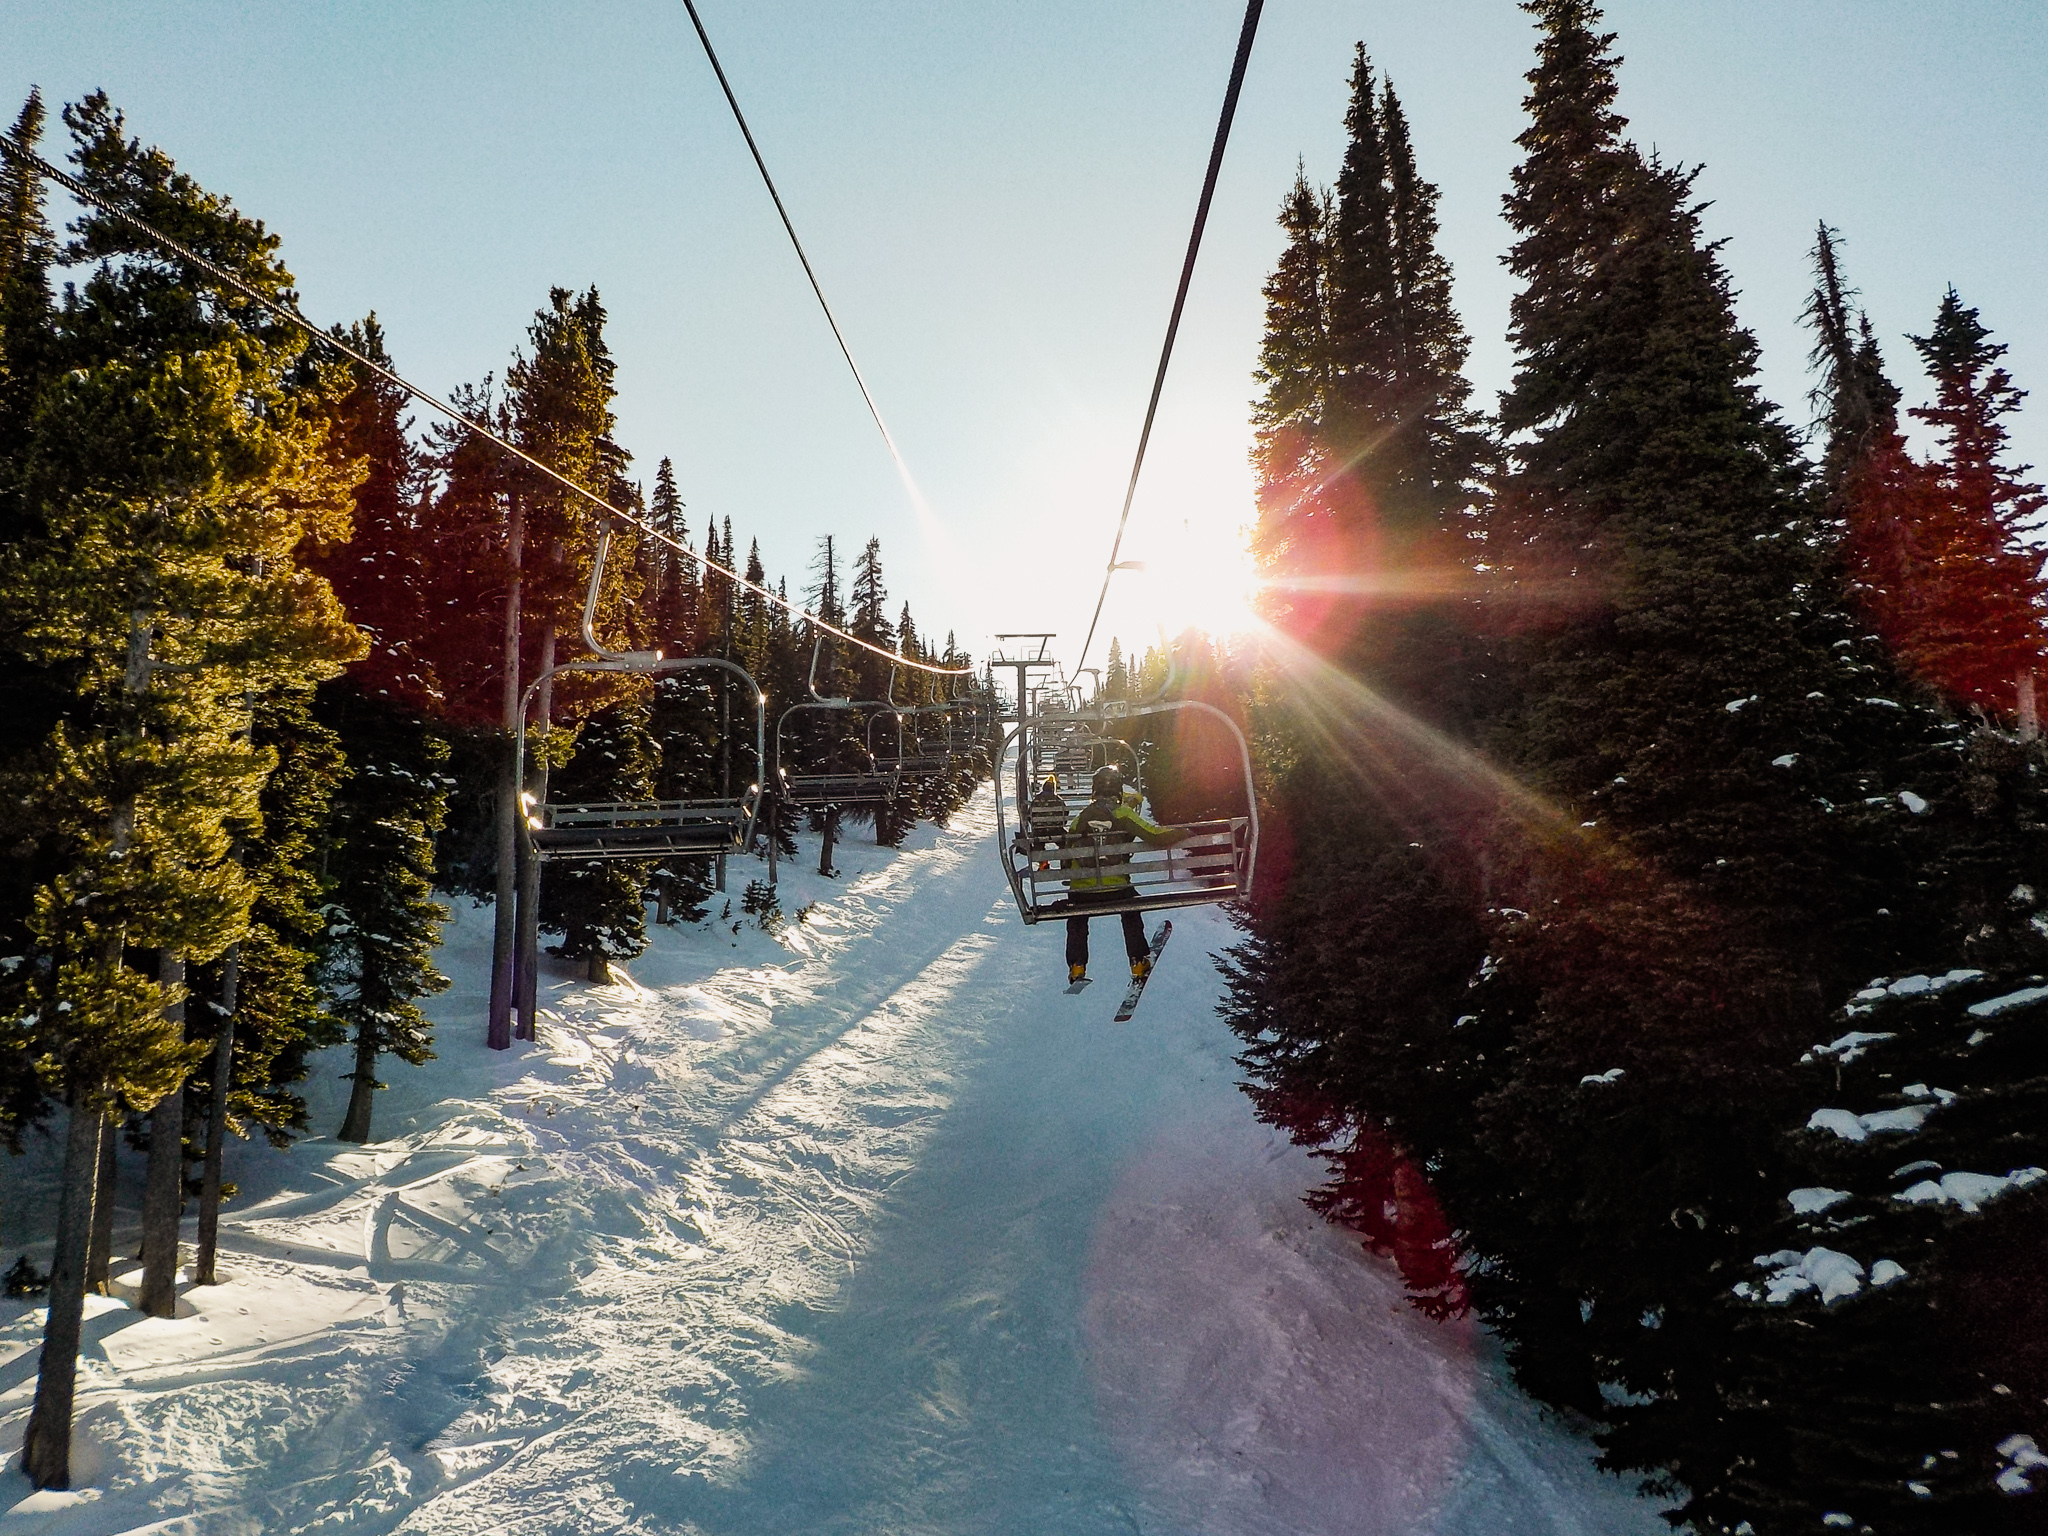 Two skiers ride on two lifts through evergreen trees during sunrise at Pomerelle Mountain Resort.